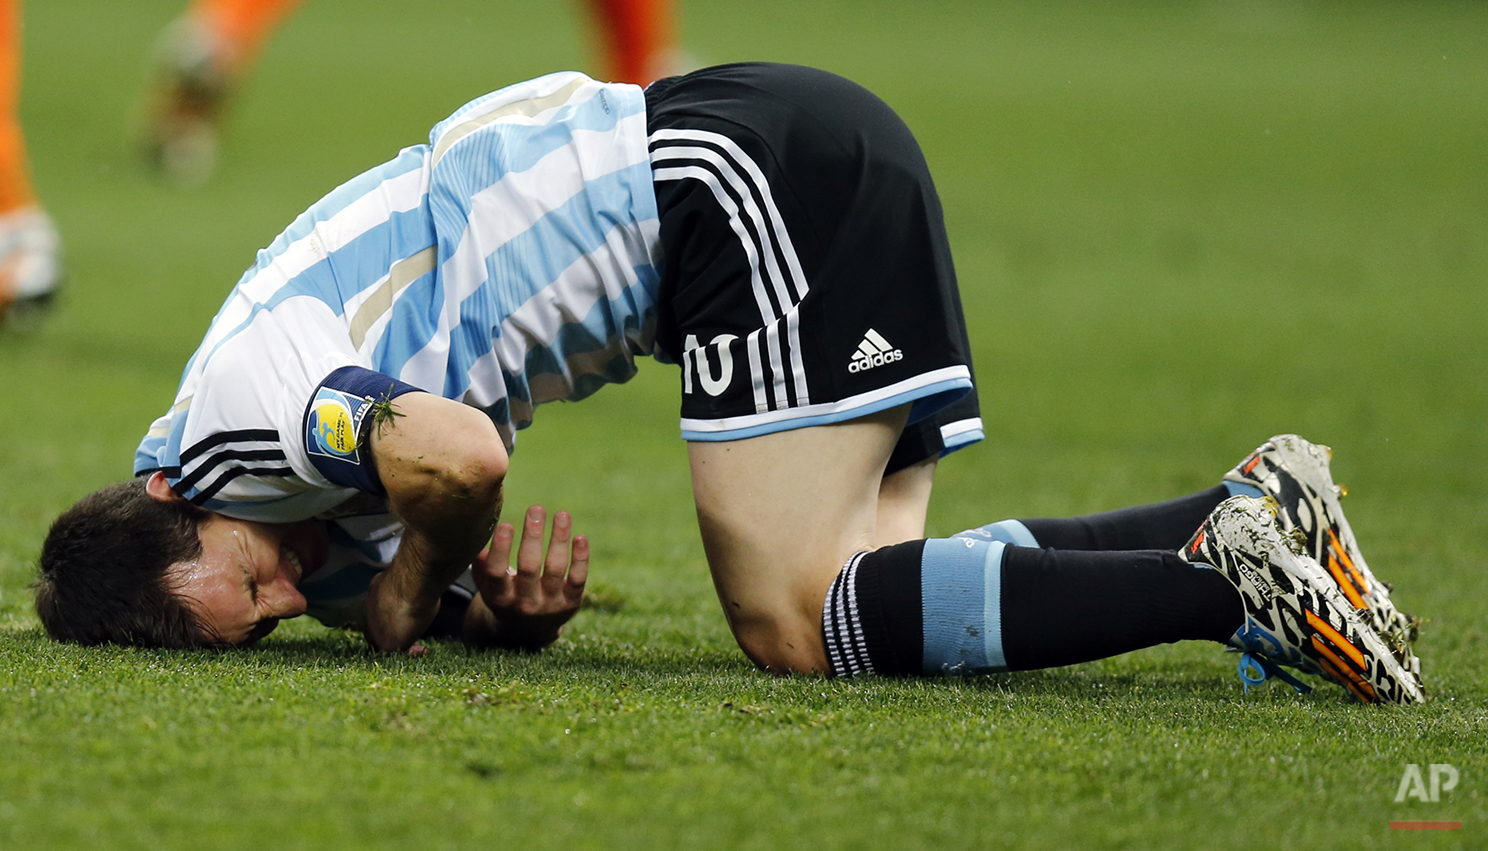  Argentina's Lionel Messi sits on the floor during the World Cup semifinal soccer match between the Netherlands and Argentina at the Itaquerao Stadium in Sao Paulo, Brazil, Wednesday, July 9, 2014. (AP Photo/Frank Augstein) 